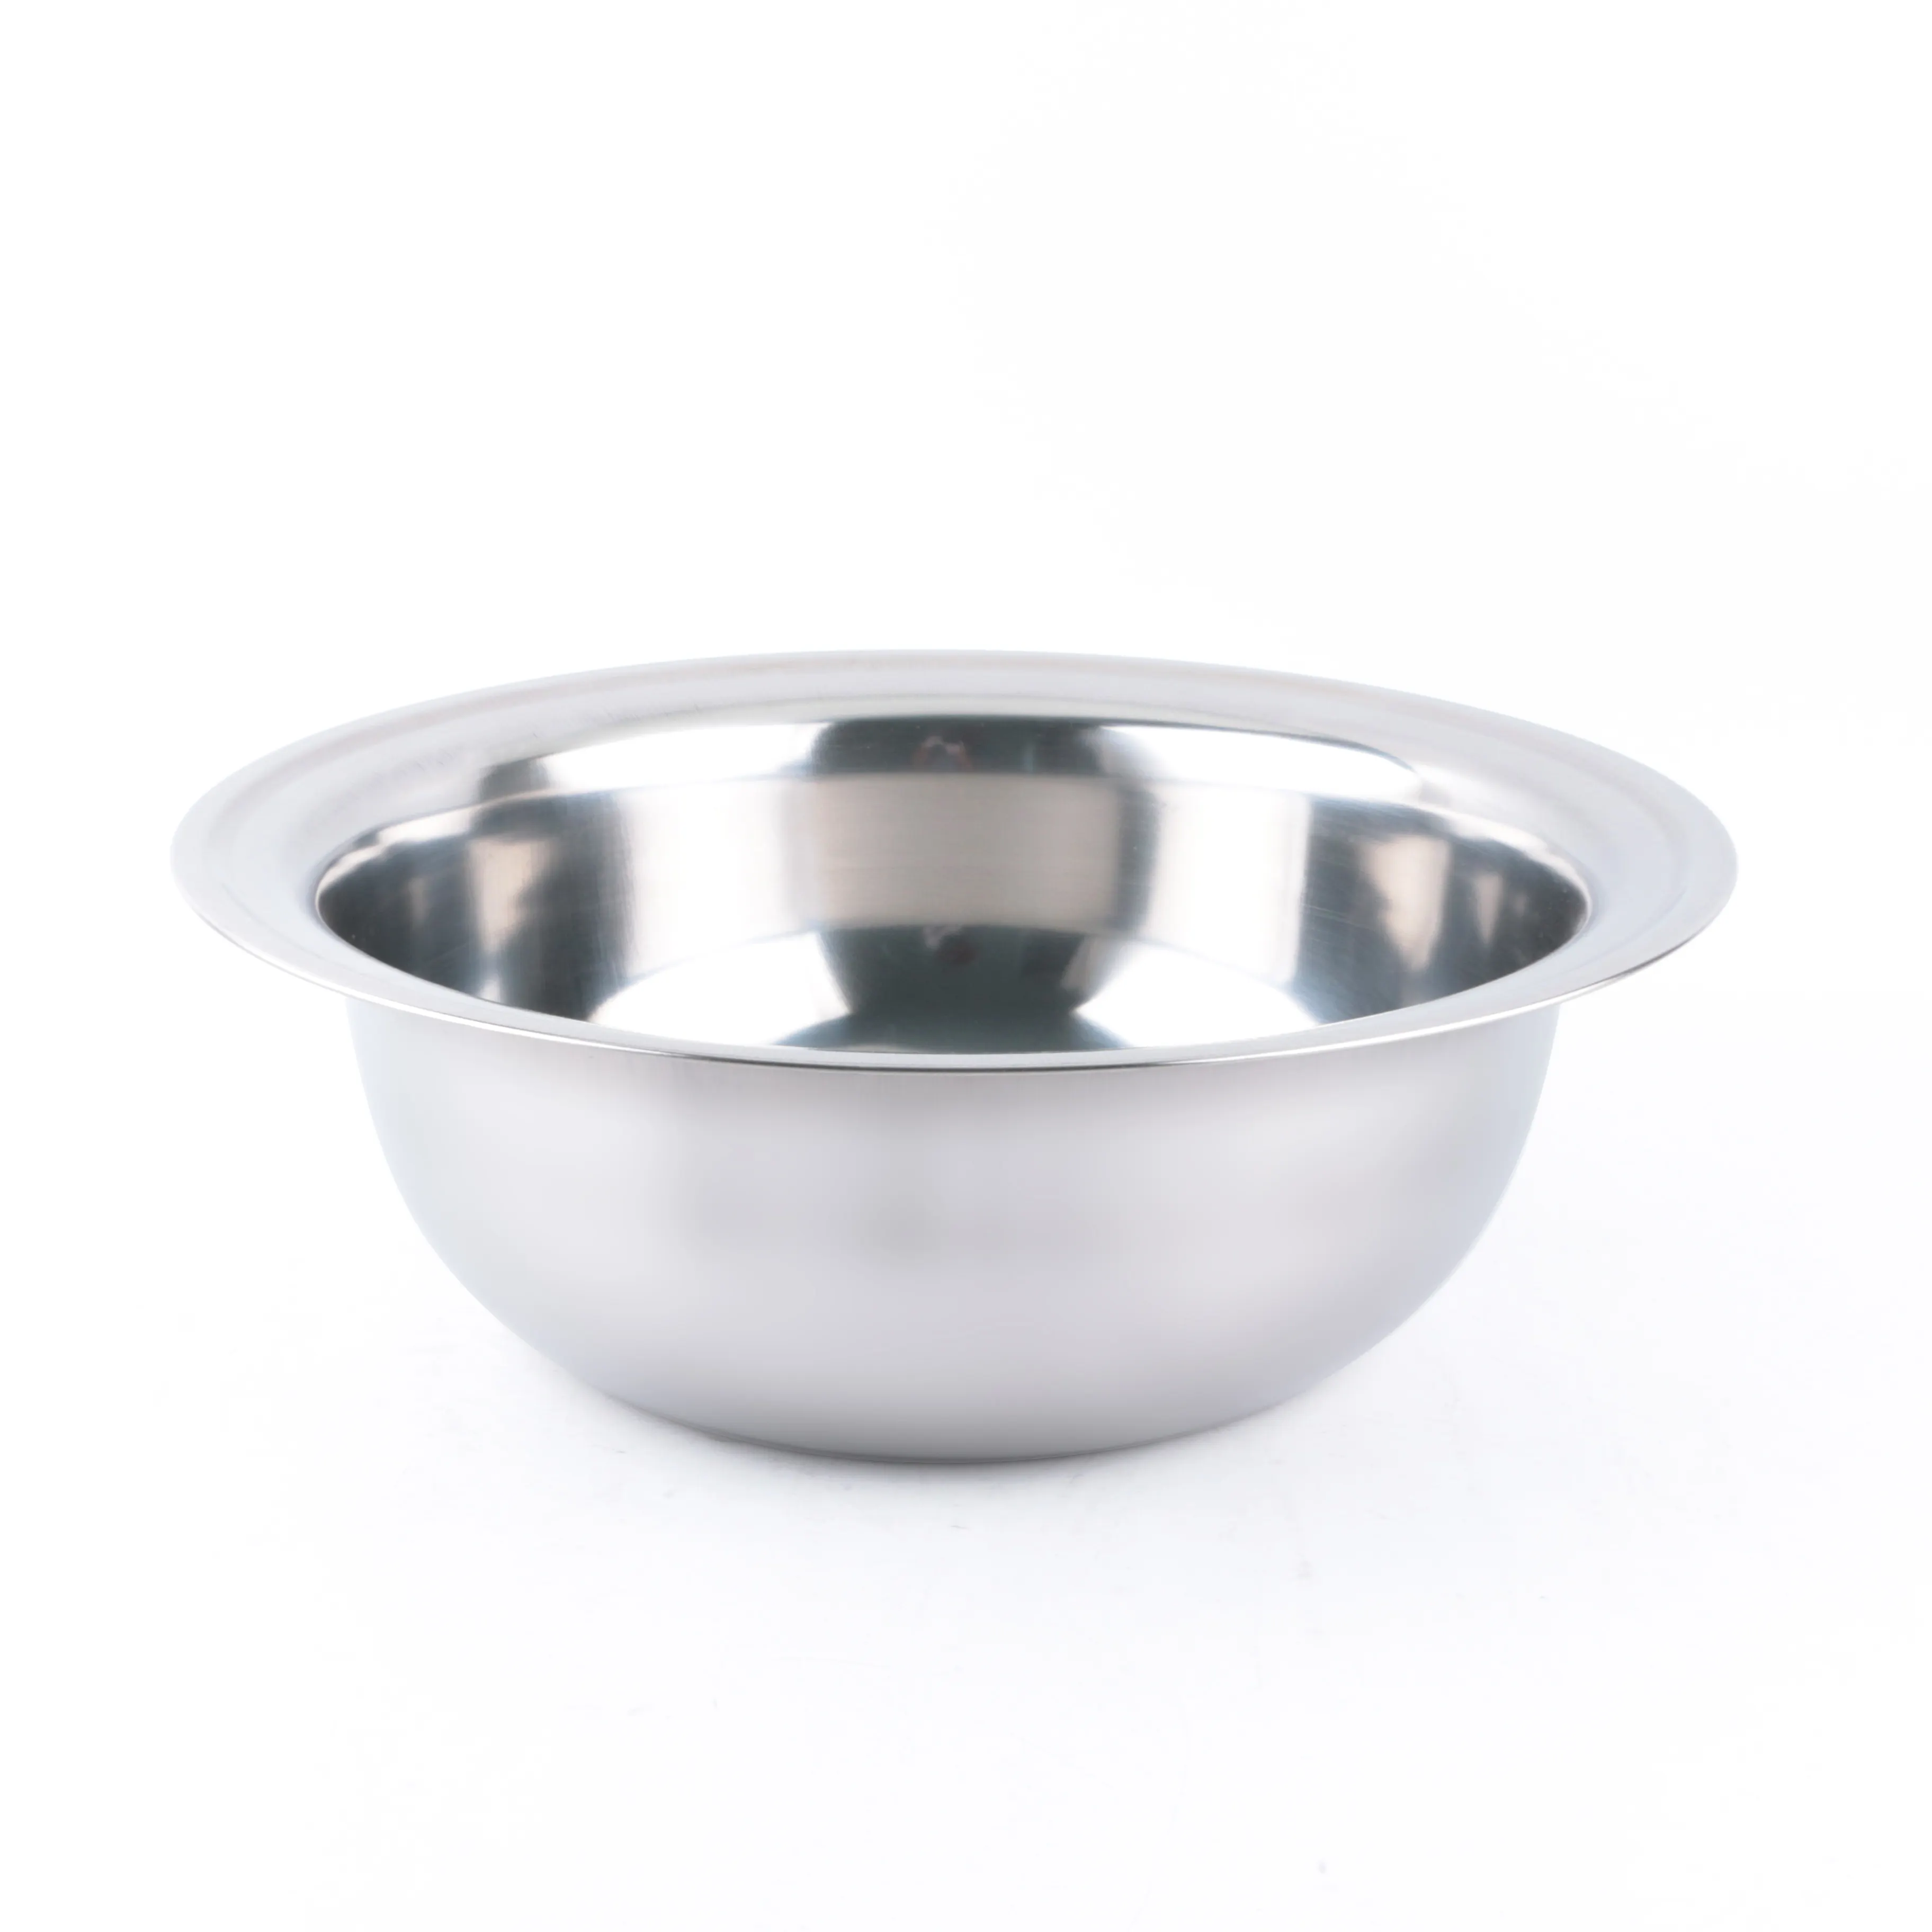 Yuantai hot selling OEM/ODM 410 stainless steel multifunction pot basin tubs